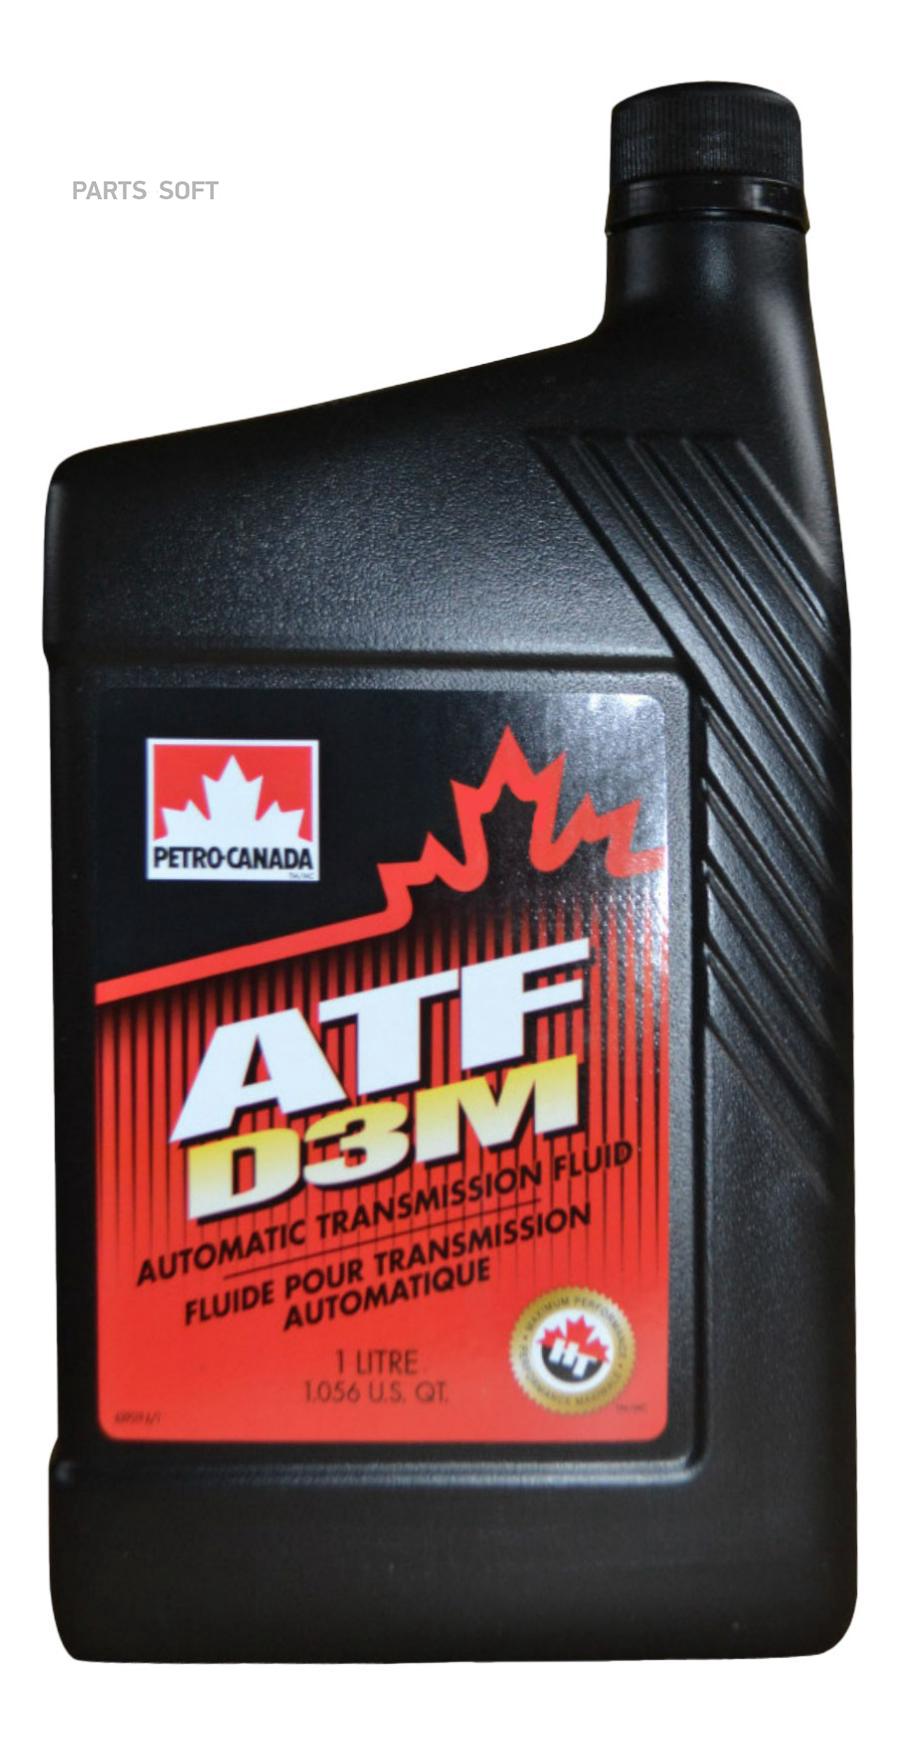 Atf d3. Petro-Canada ATF d3m Прадо 95. AMMIX ATF d3-SP. Масло Альпина трансмиссия фото канистры. ATF Canada Oil.